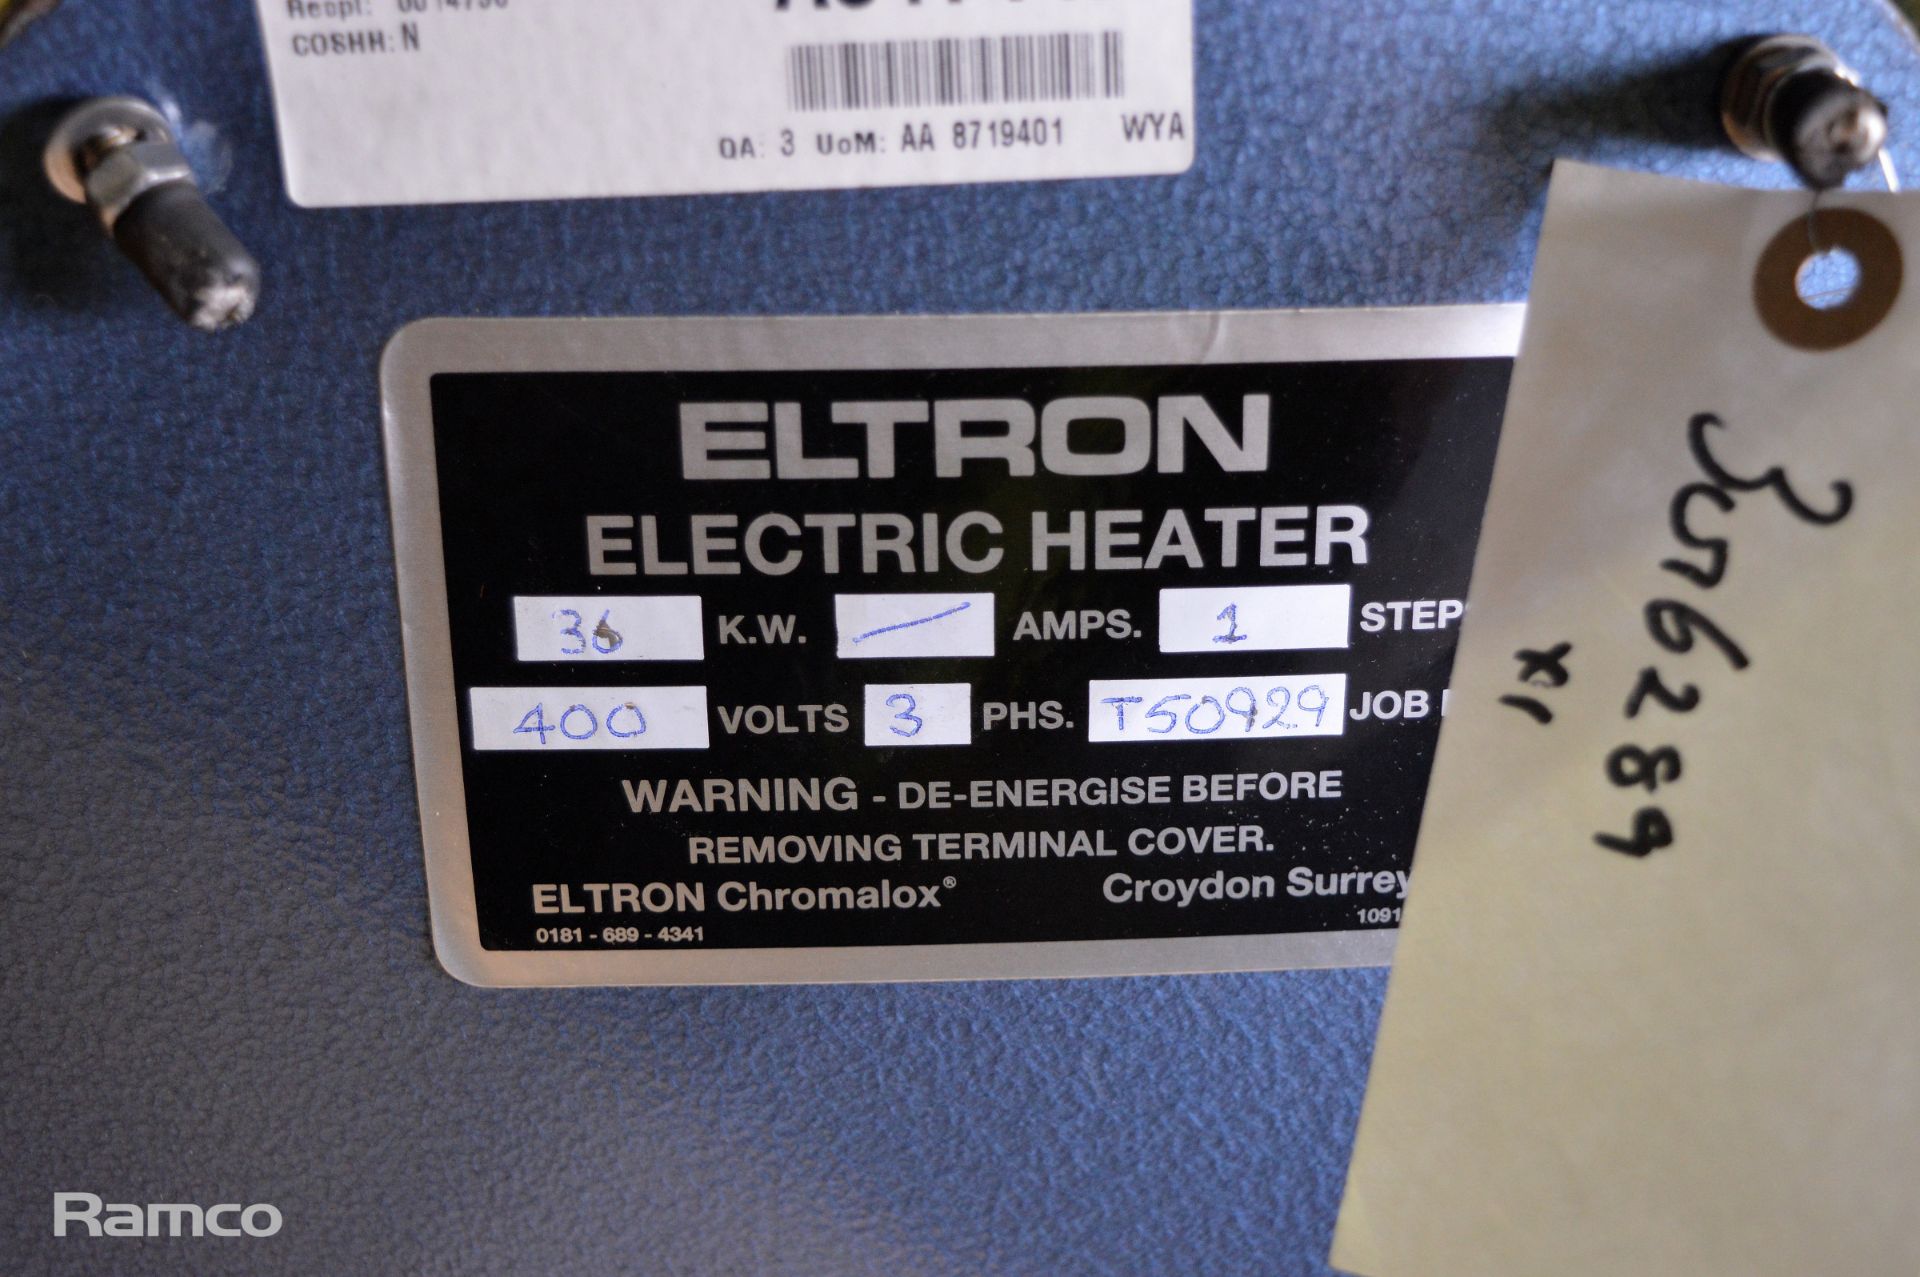 Eltron electric heater 36 Kw 400V - Image 4 of 4